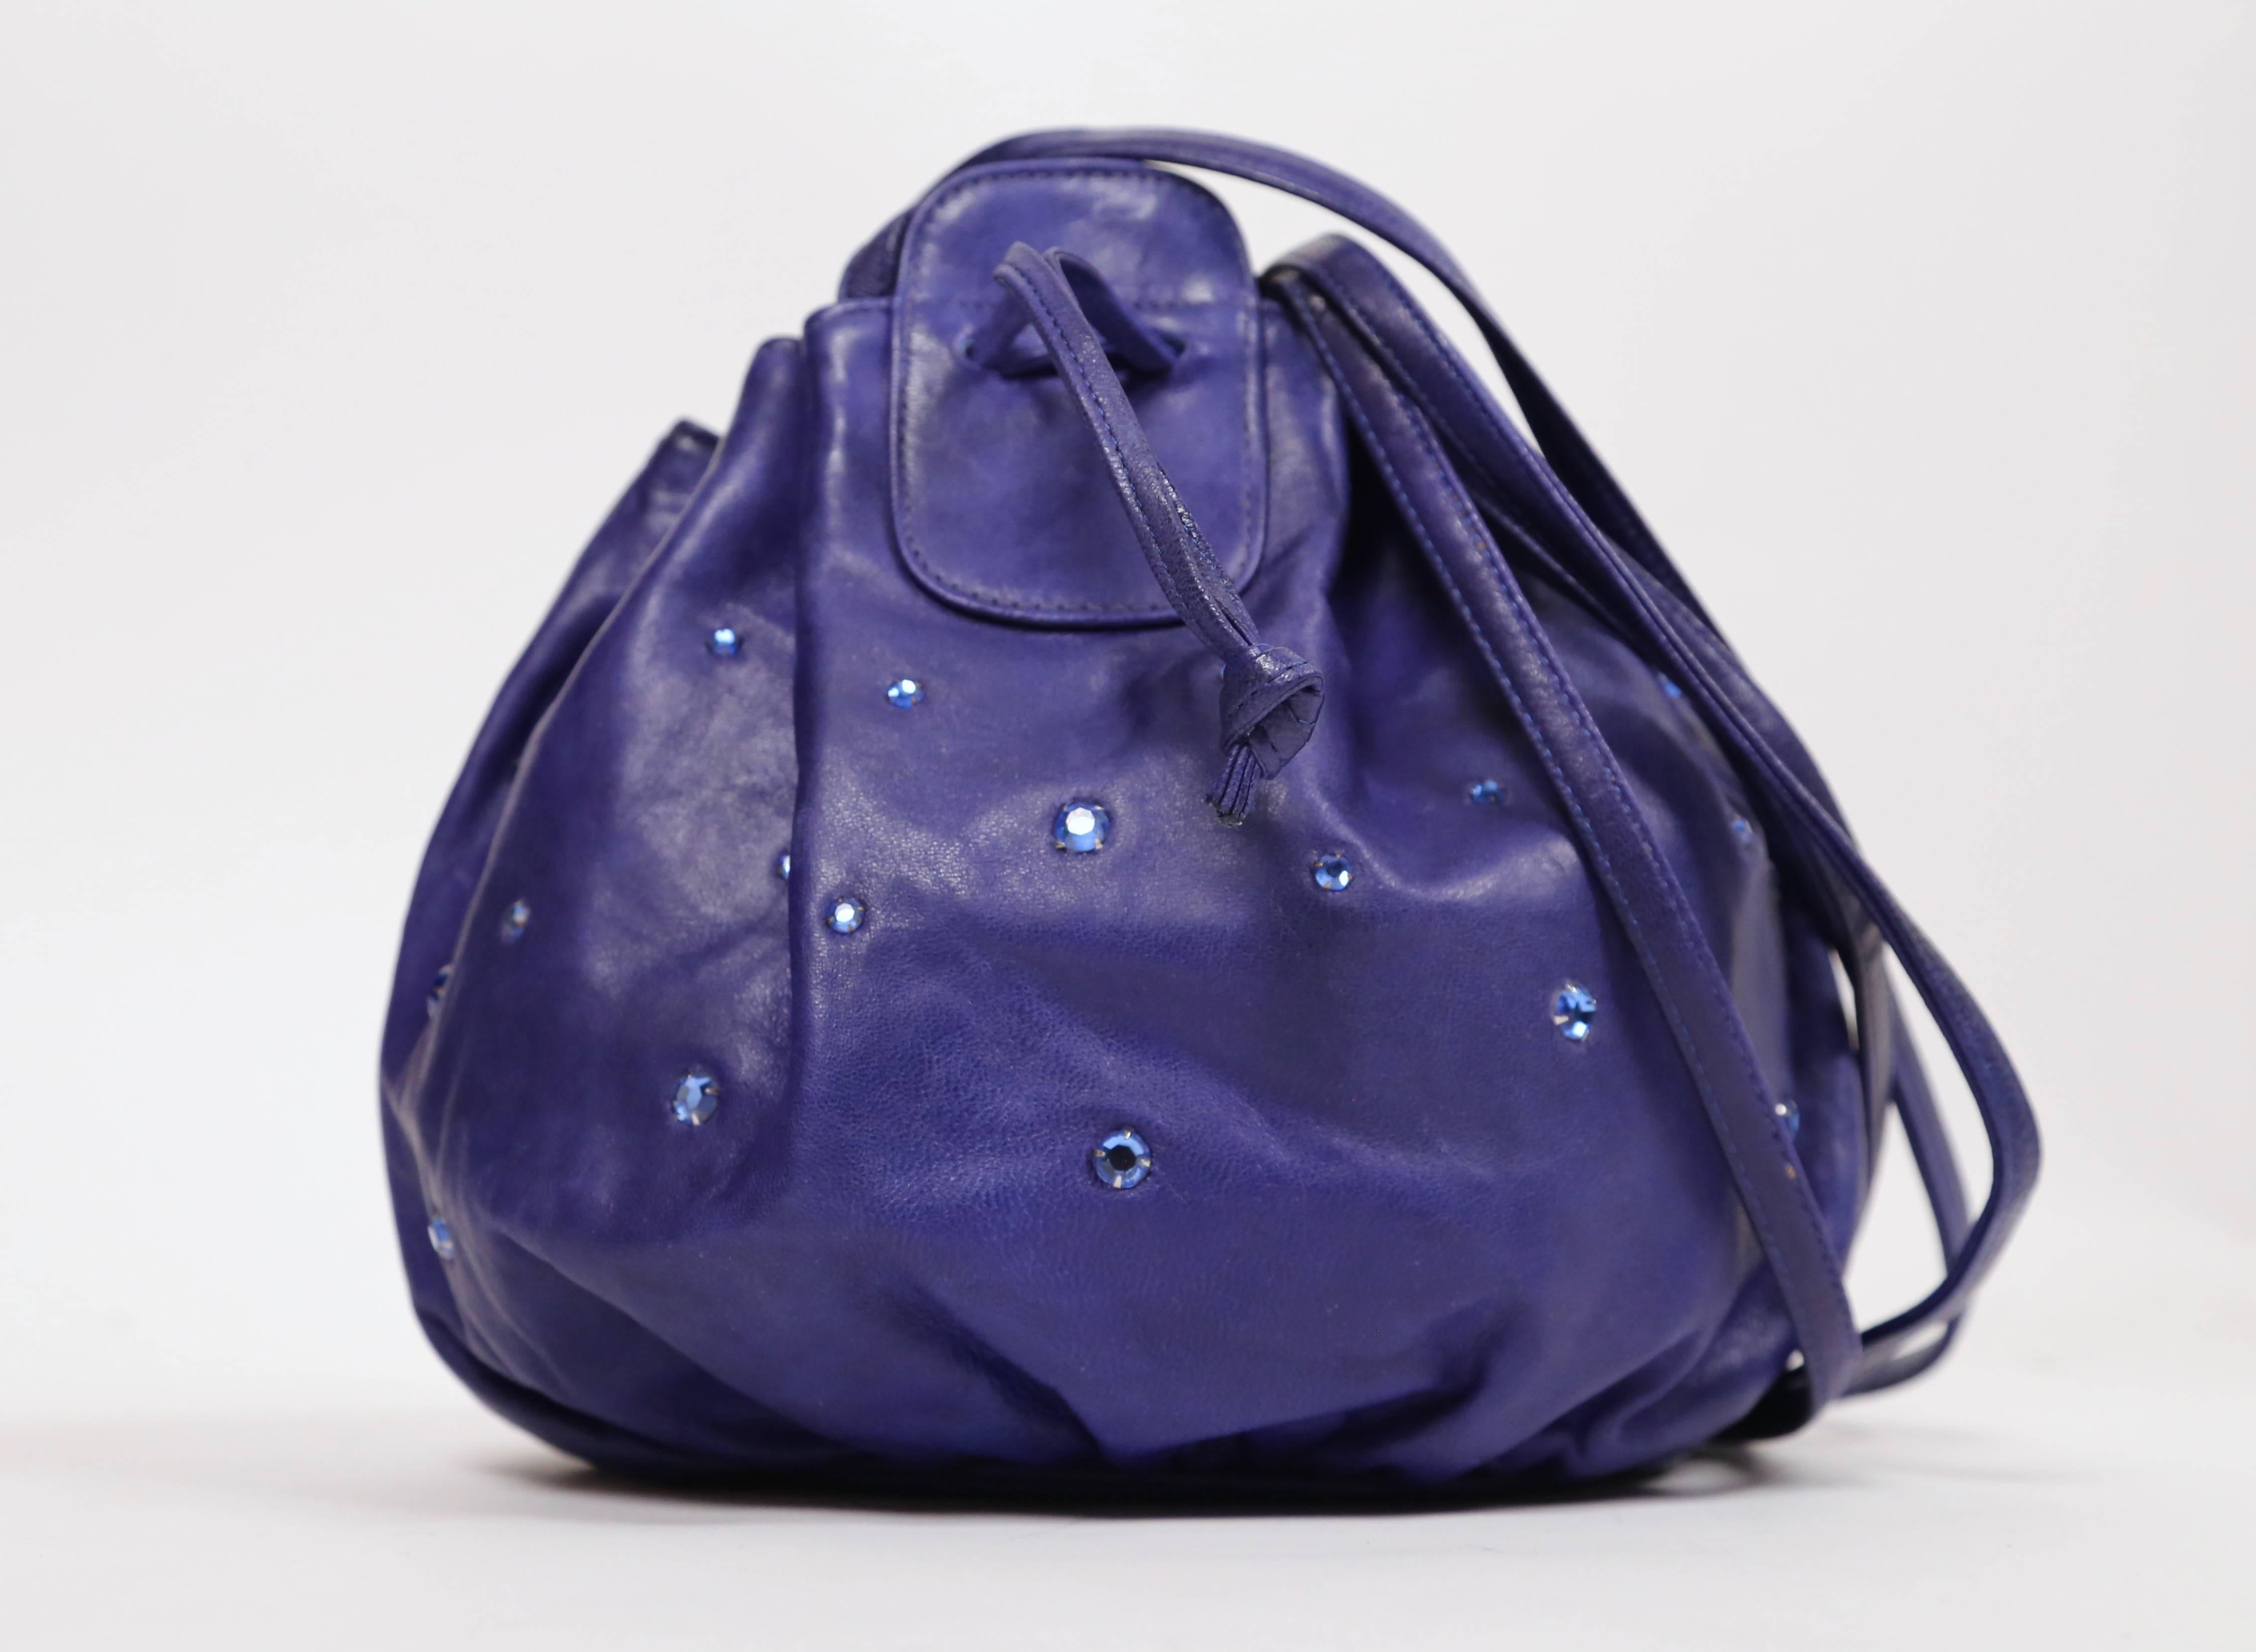 Vivid royal blue leather bucket bag with rhinestones from Halston dating to the late 1970's. Bag measures approximately 7